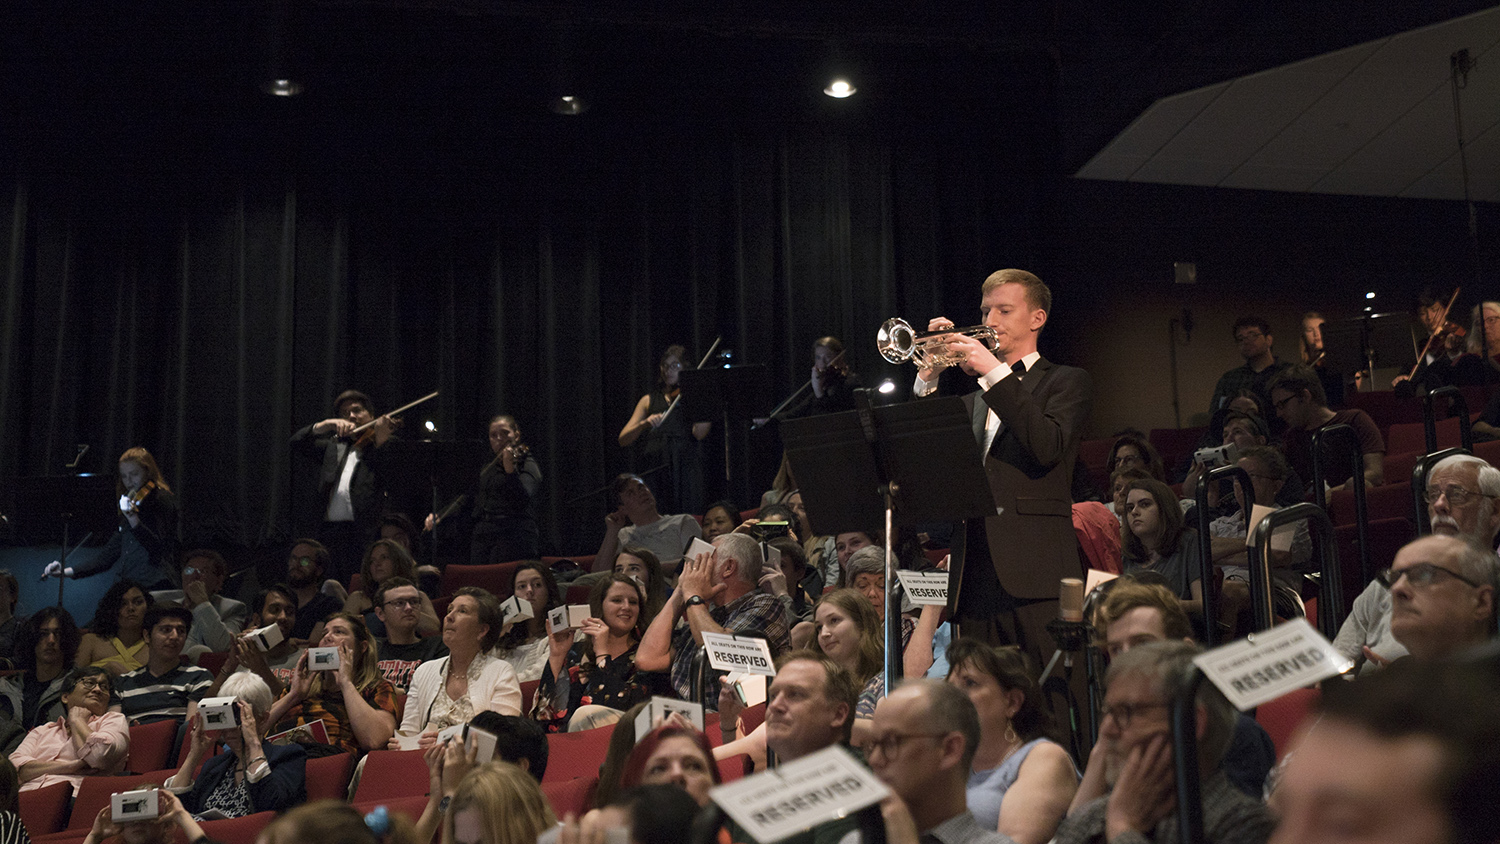 A trumpet player plays surrounded by members of the audience, some of whom are using VR headsets.